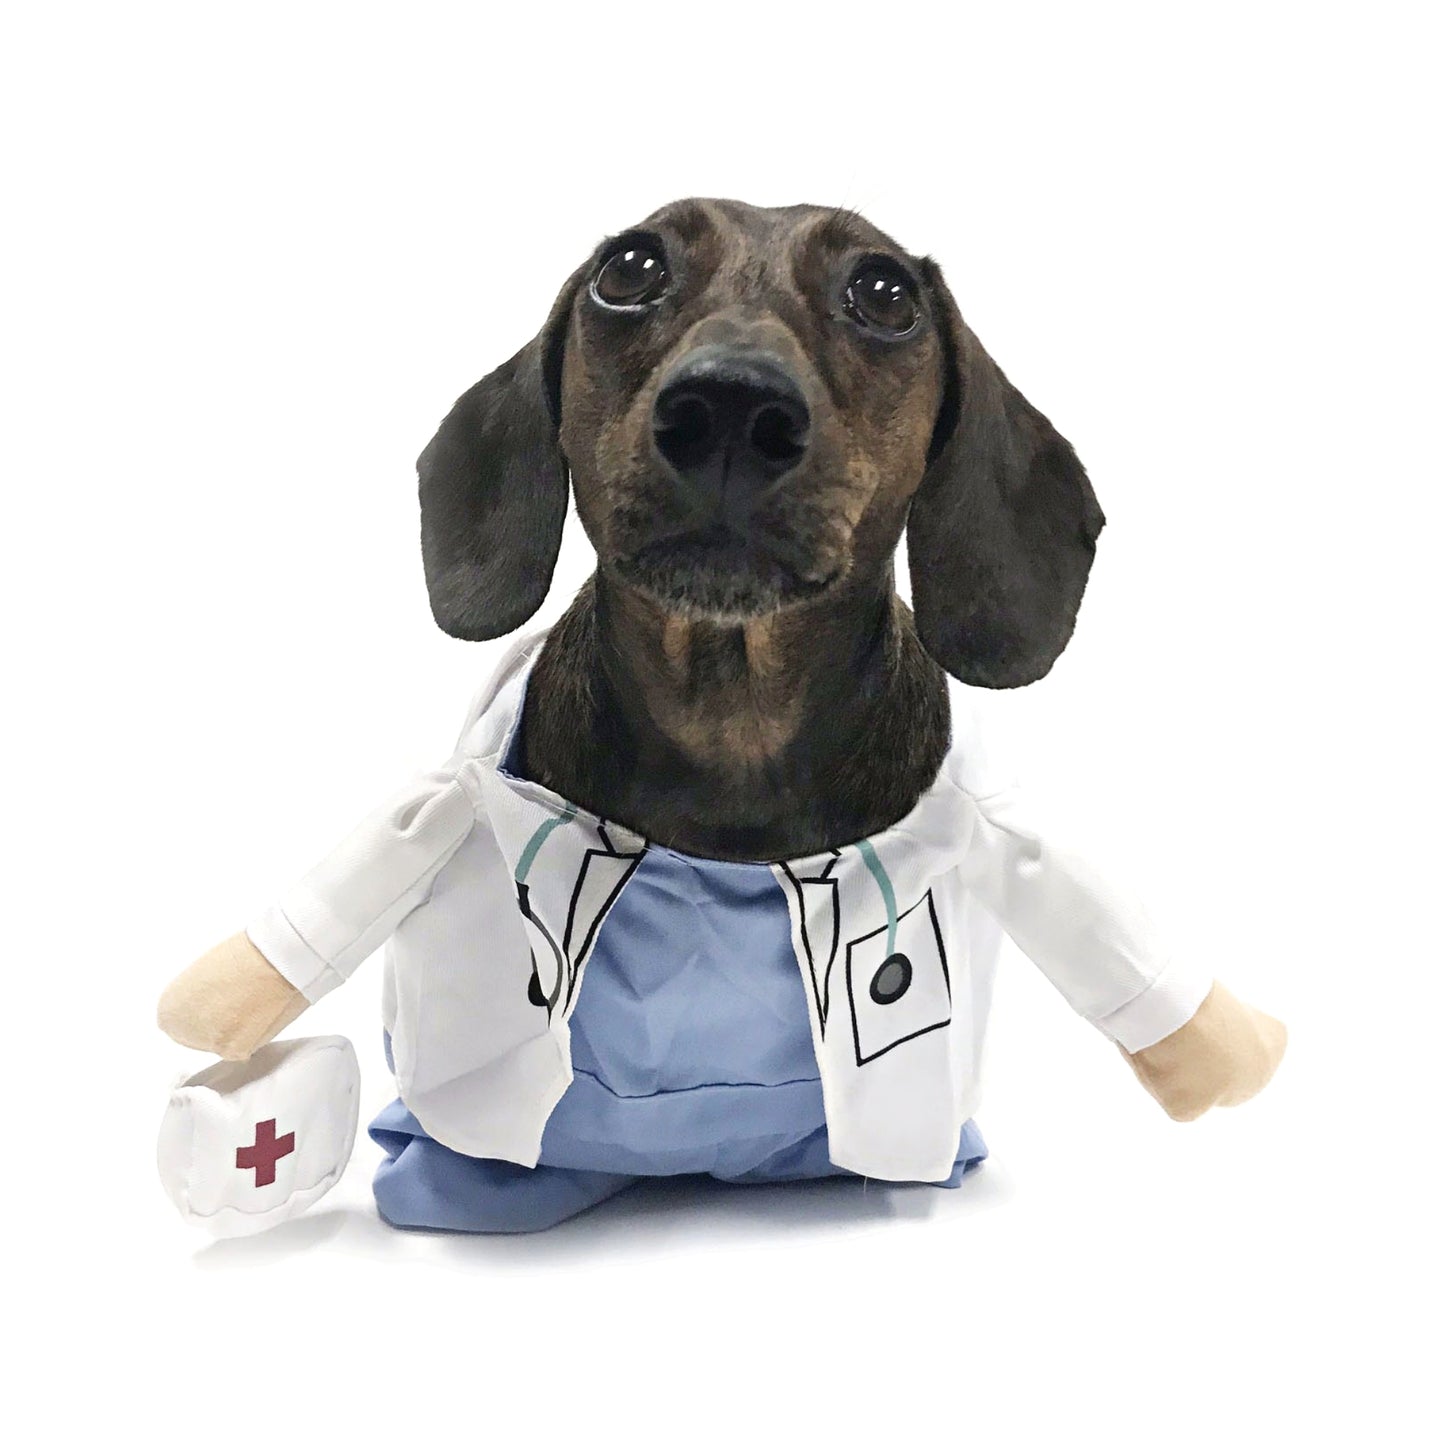 Midlee Fake Doctor Arms Costume for Small Dogs (Small)